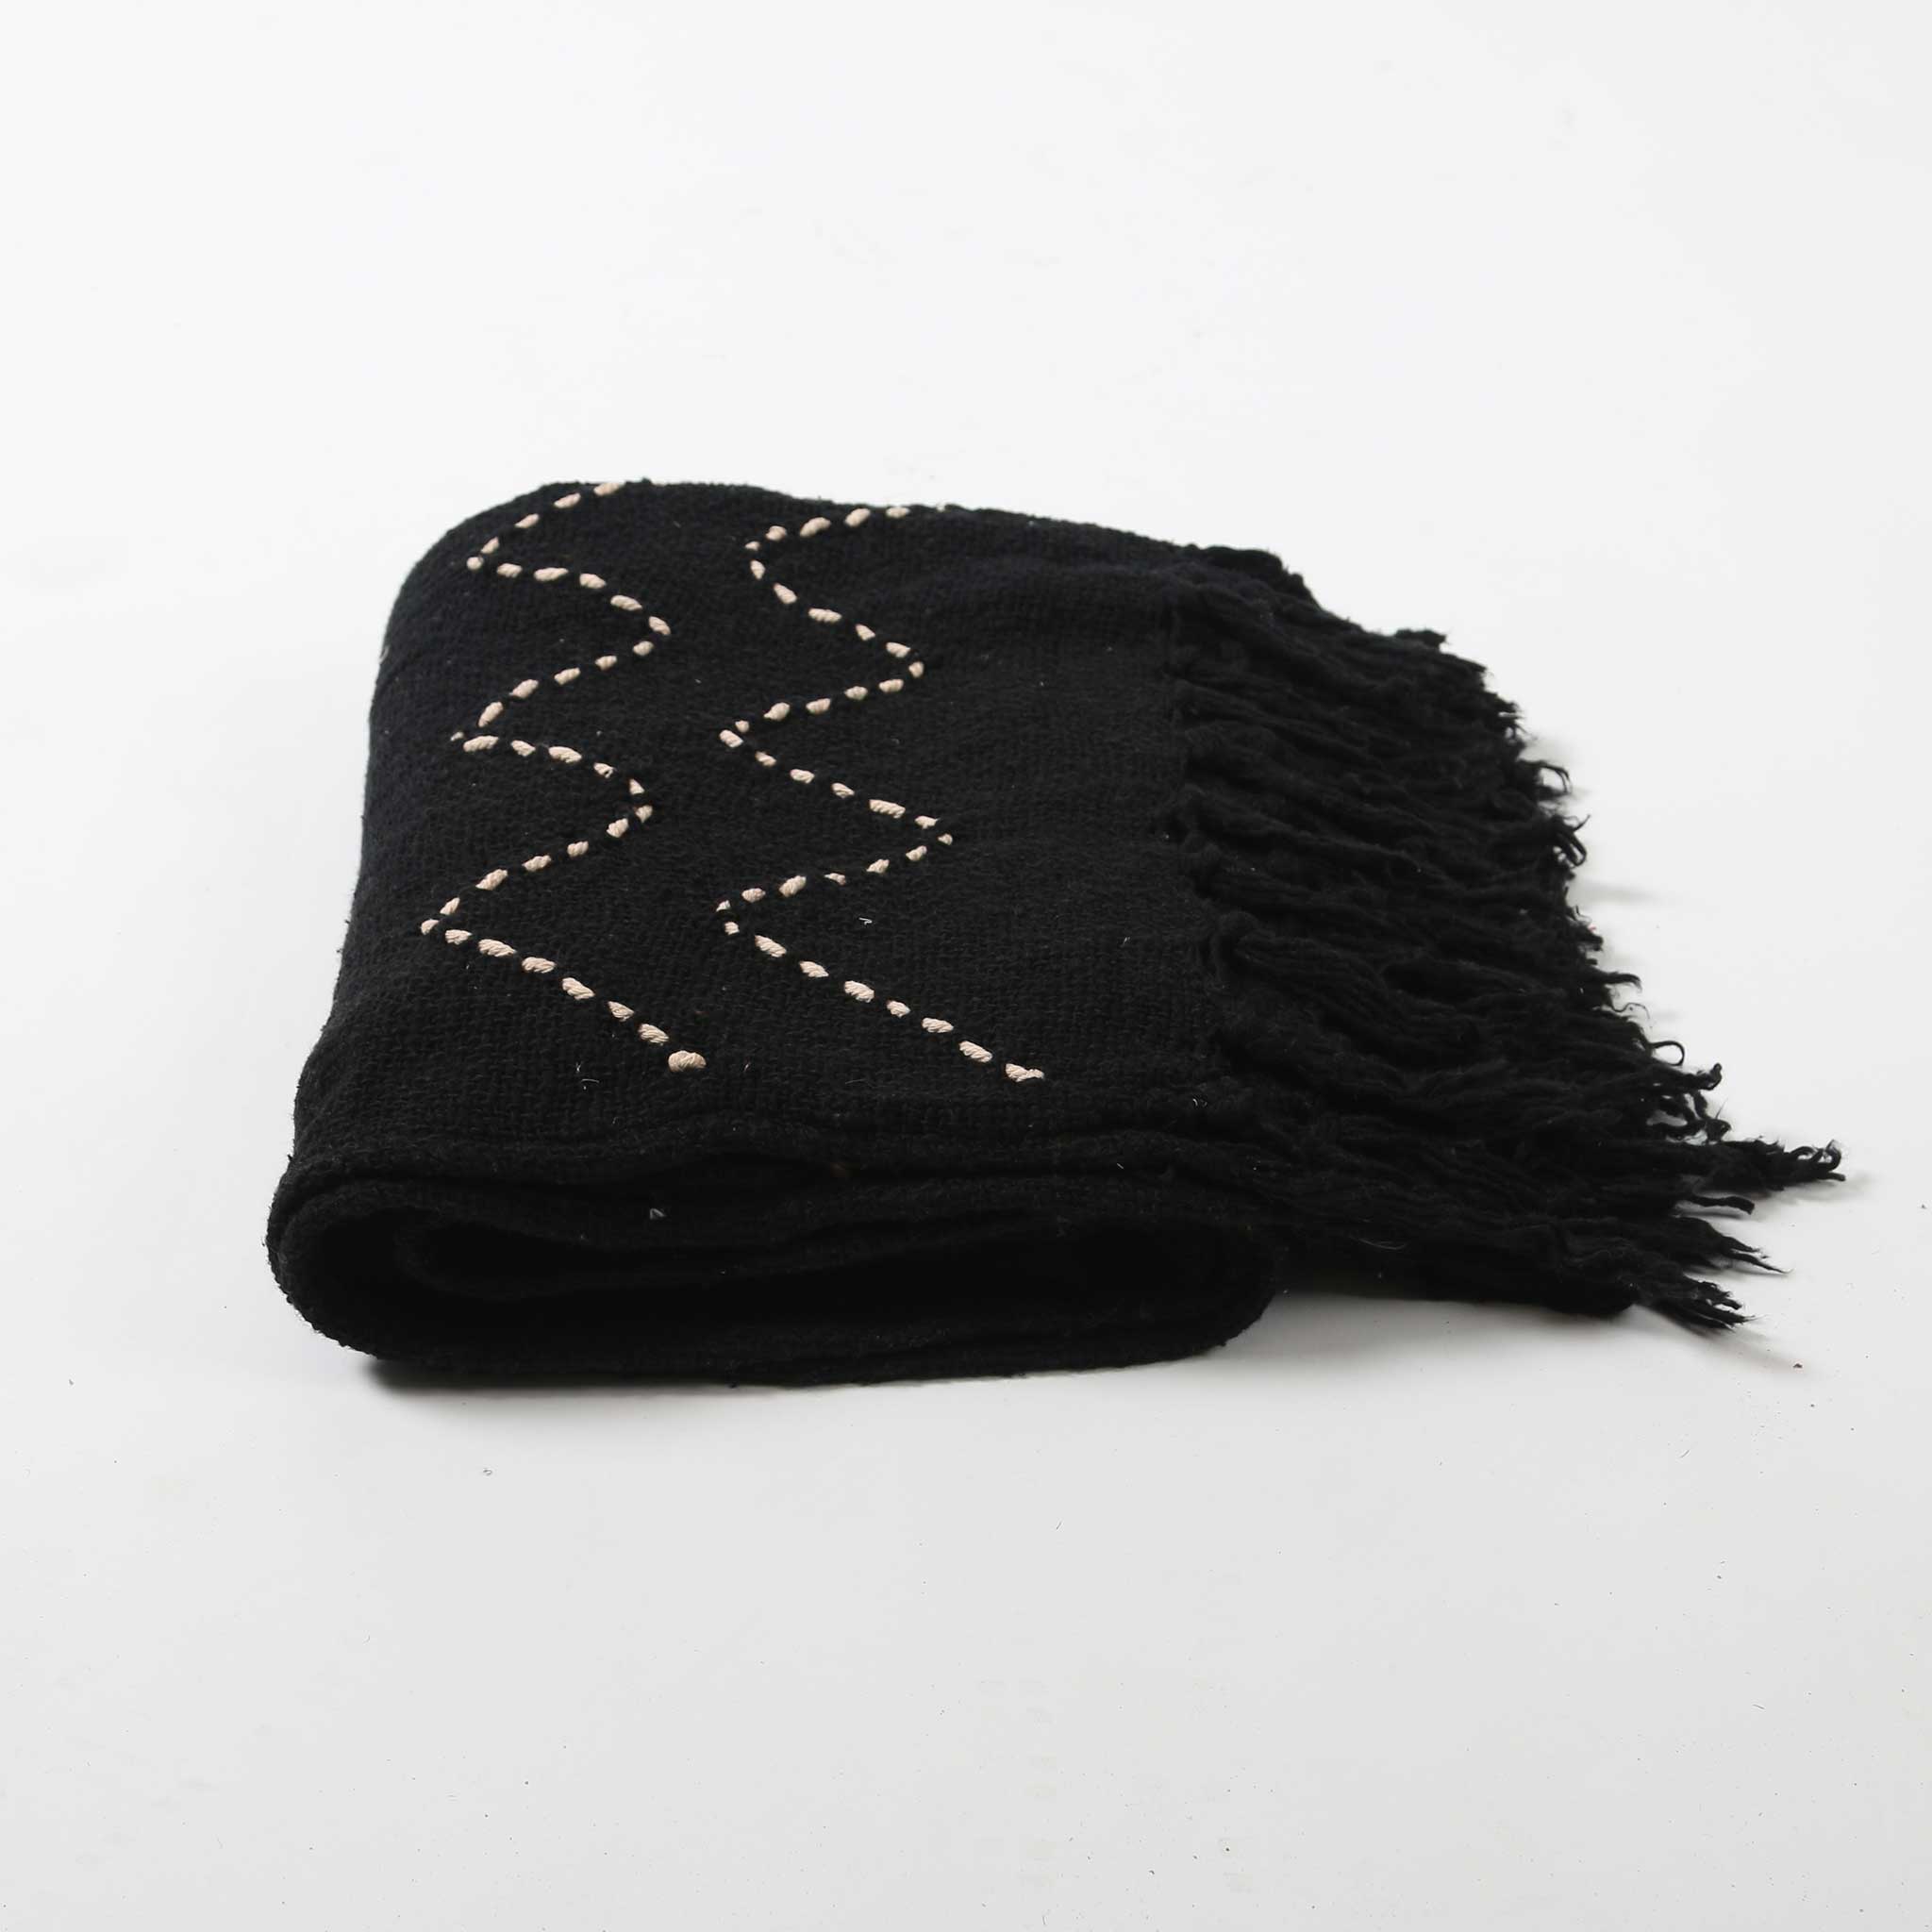 Black Cotton Throw with Zig Zag Stitched Pattern and Black Fringing